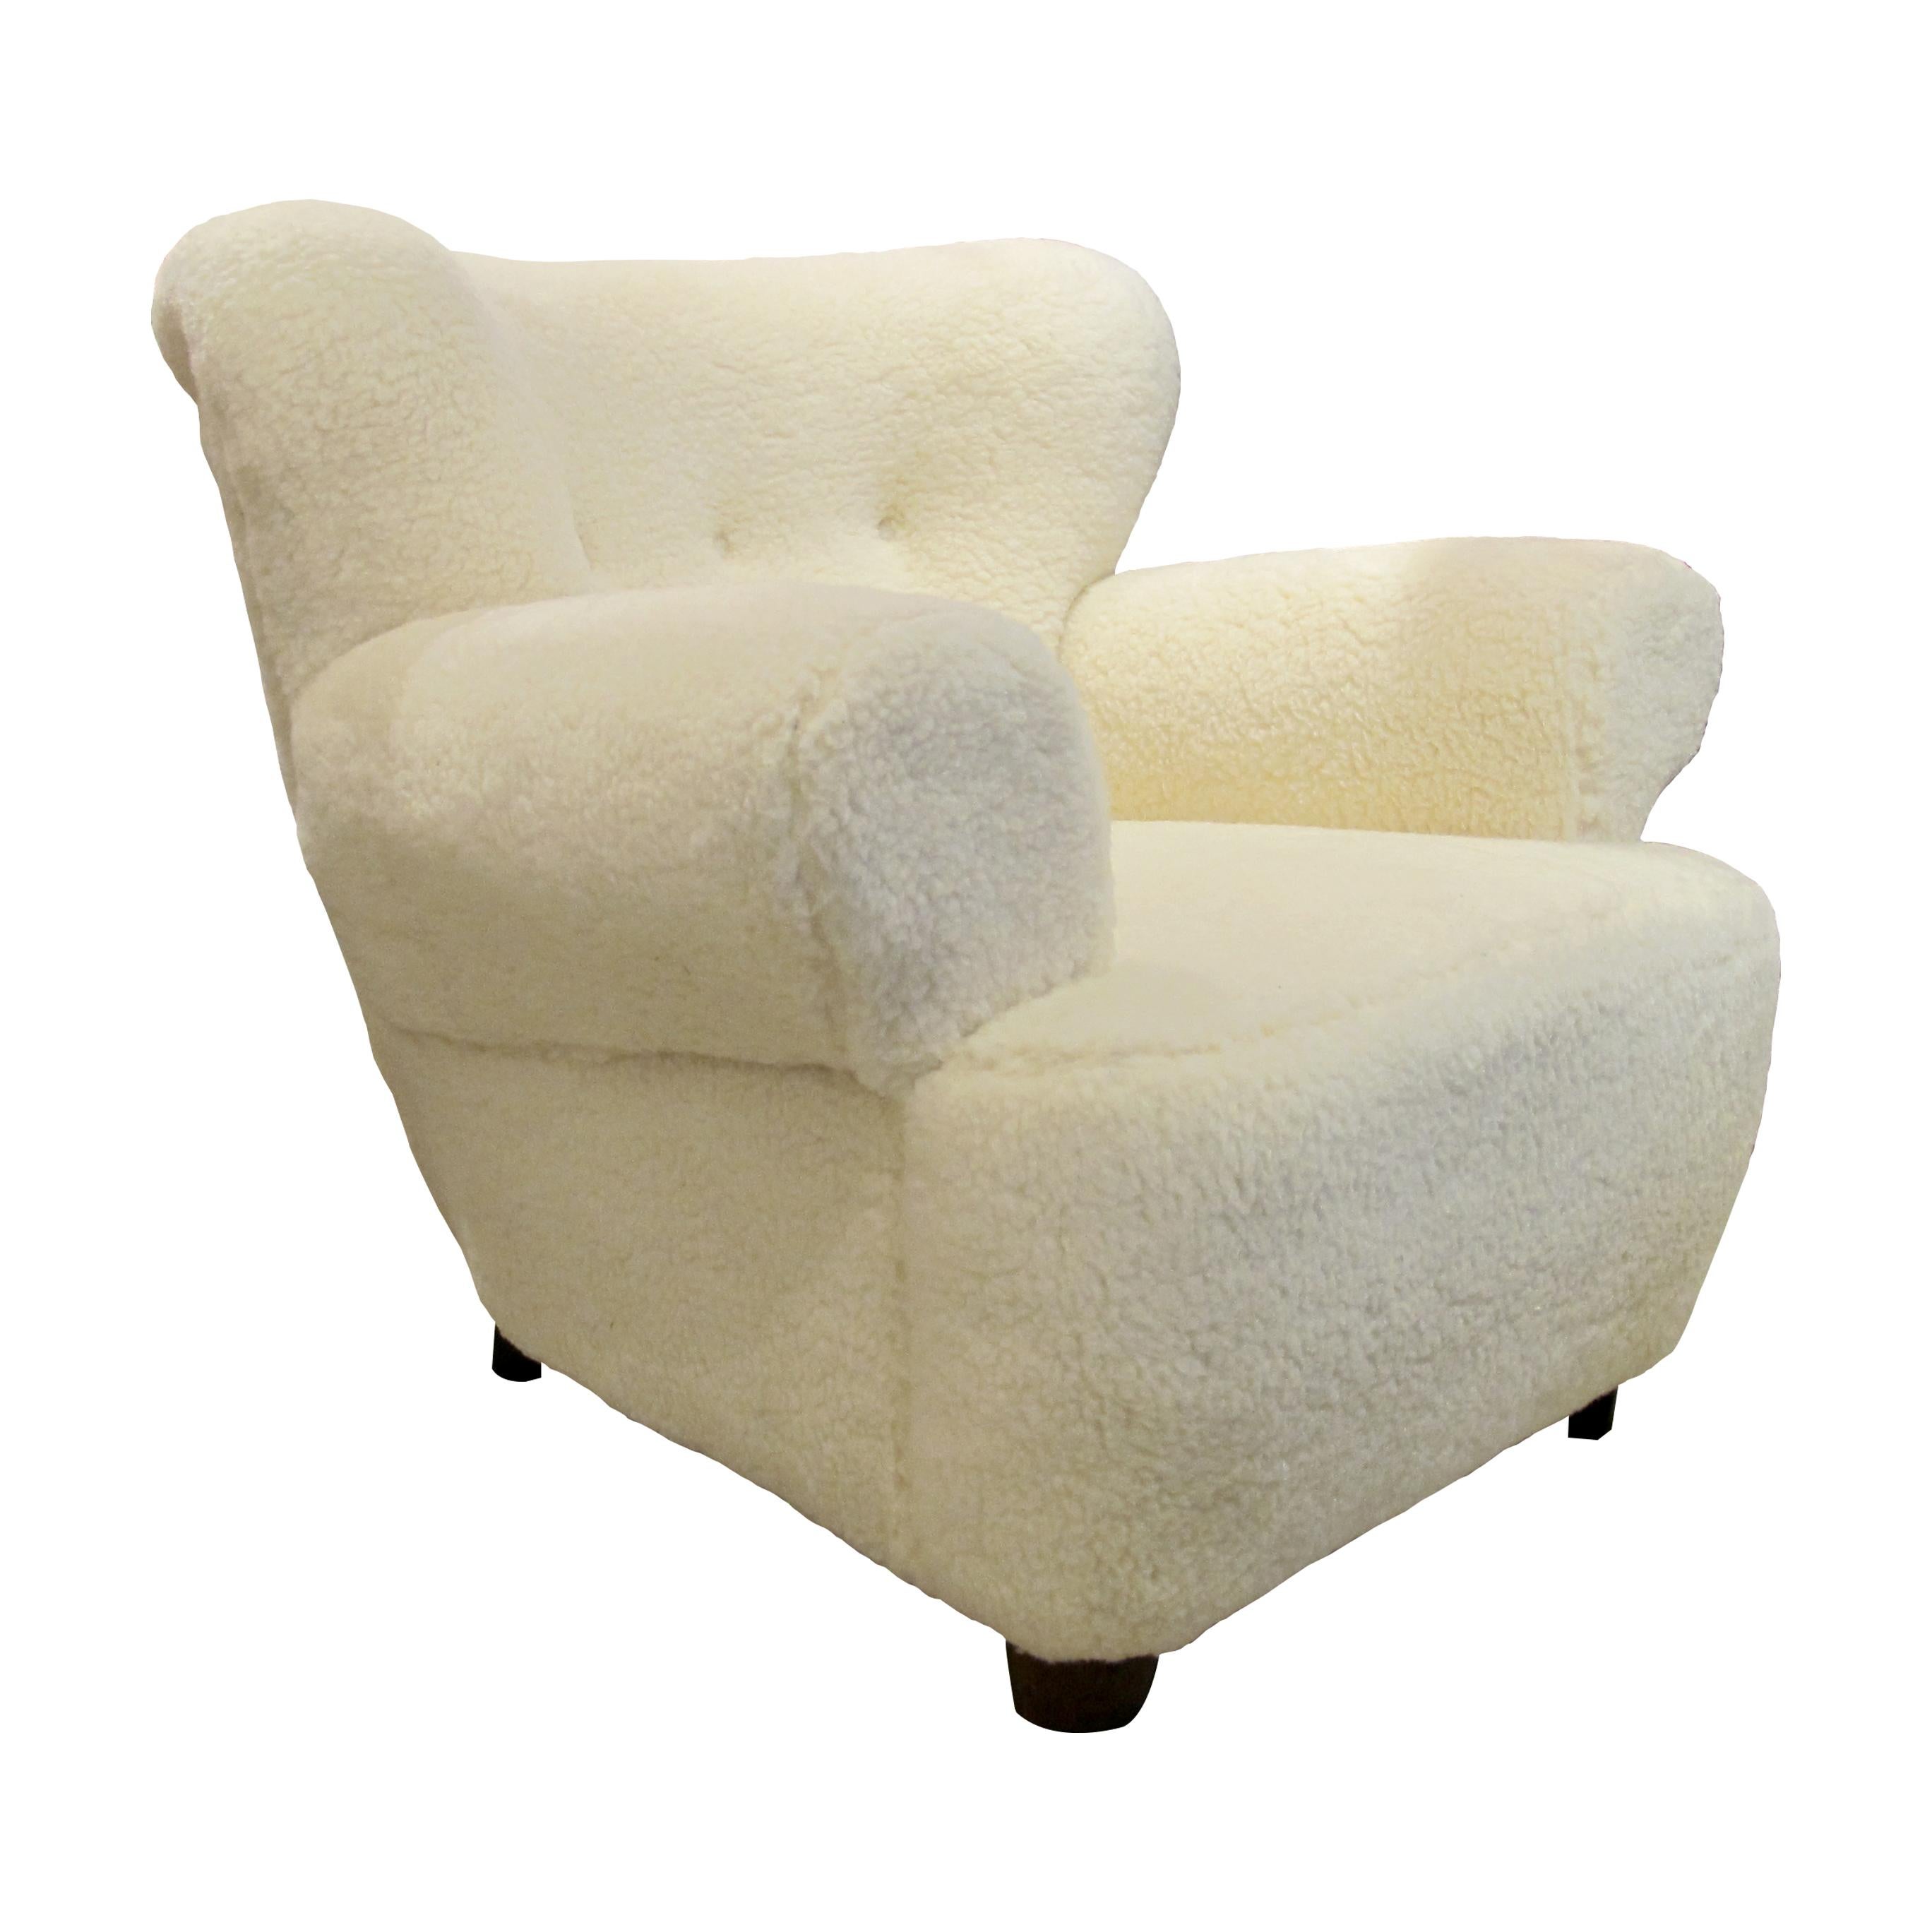 Mid-Century Modern Pair of 1950s Large Swedish Armchairs Newly Upholstered in a Lamb Mix Fabric